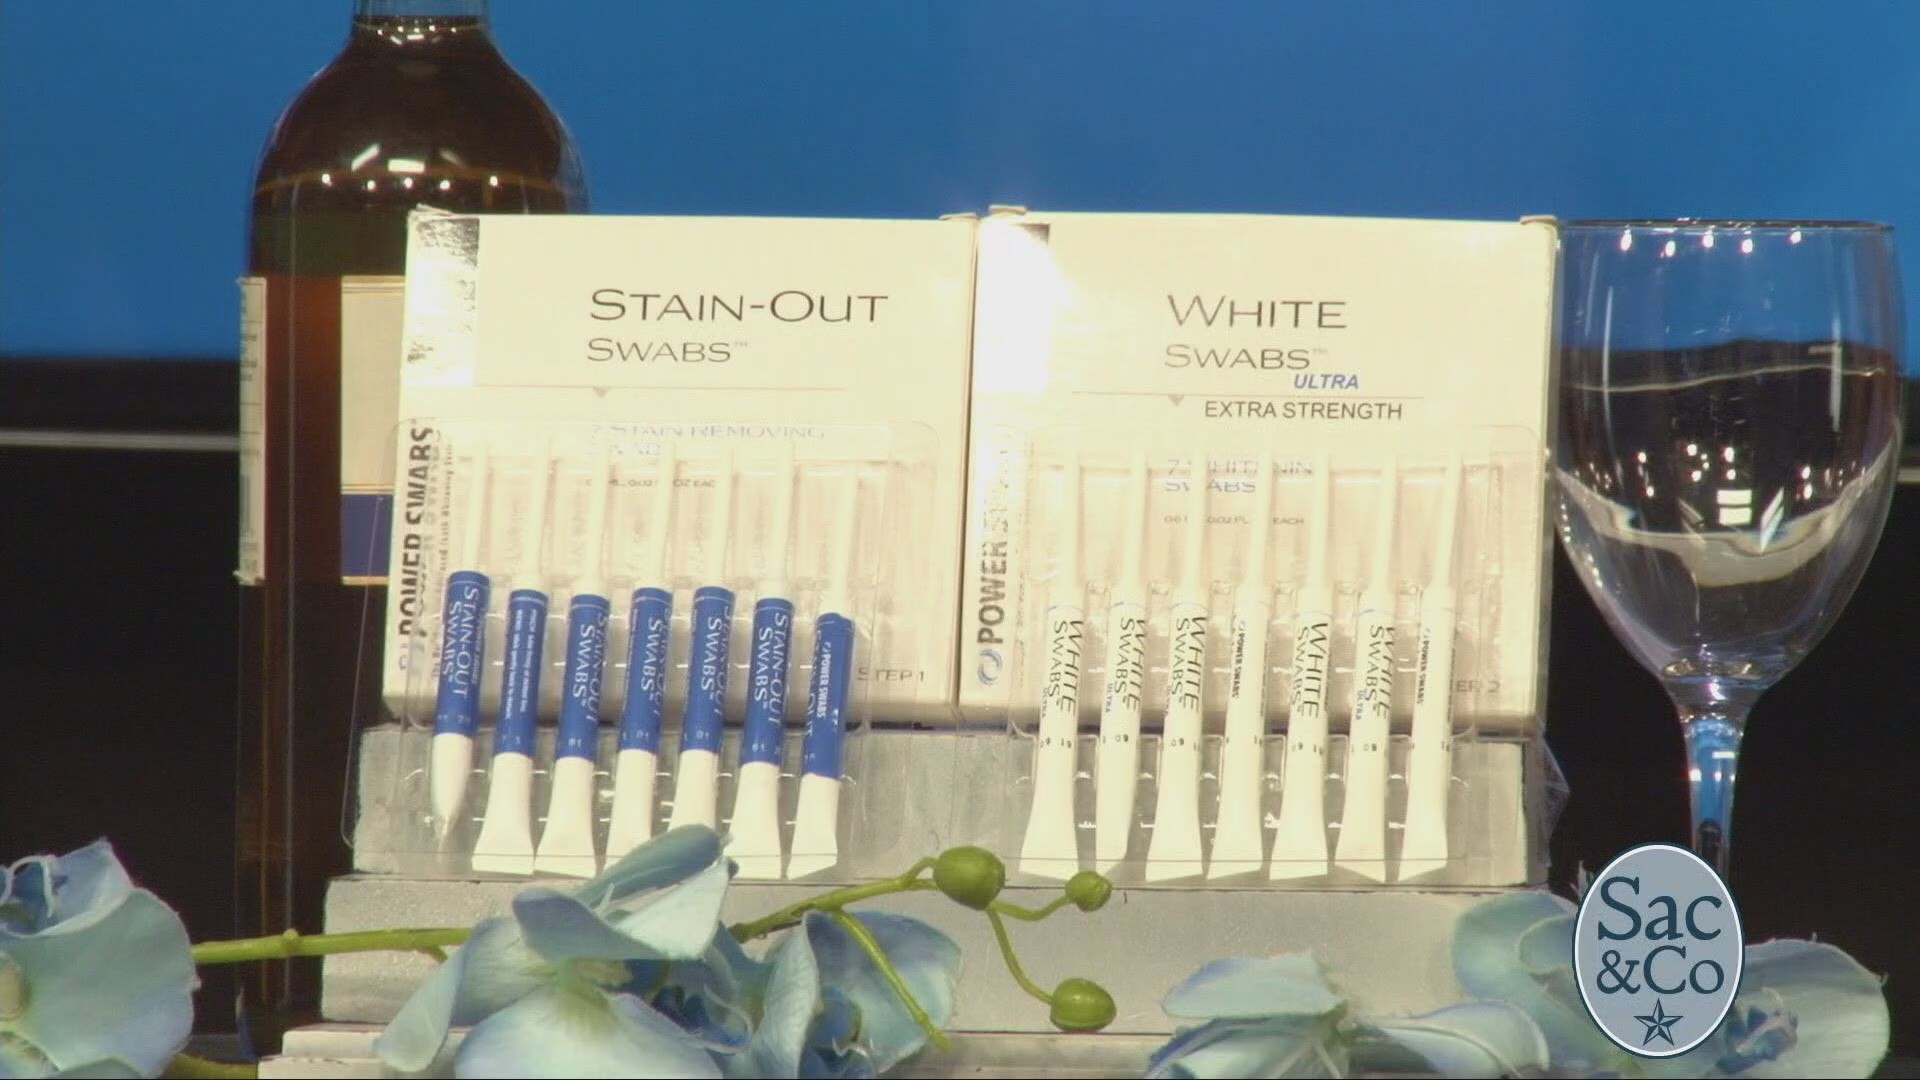 Learn how Power Swabs can give you a confident smile conveniently without sensitivity. The following is a paid segment sponsored by True Earth Health Solutions.